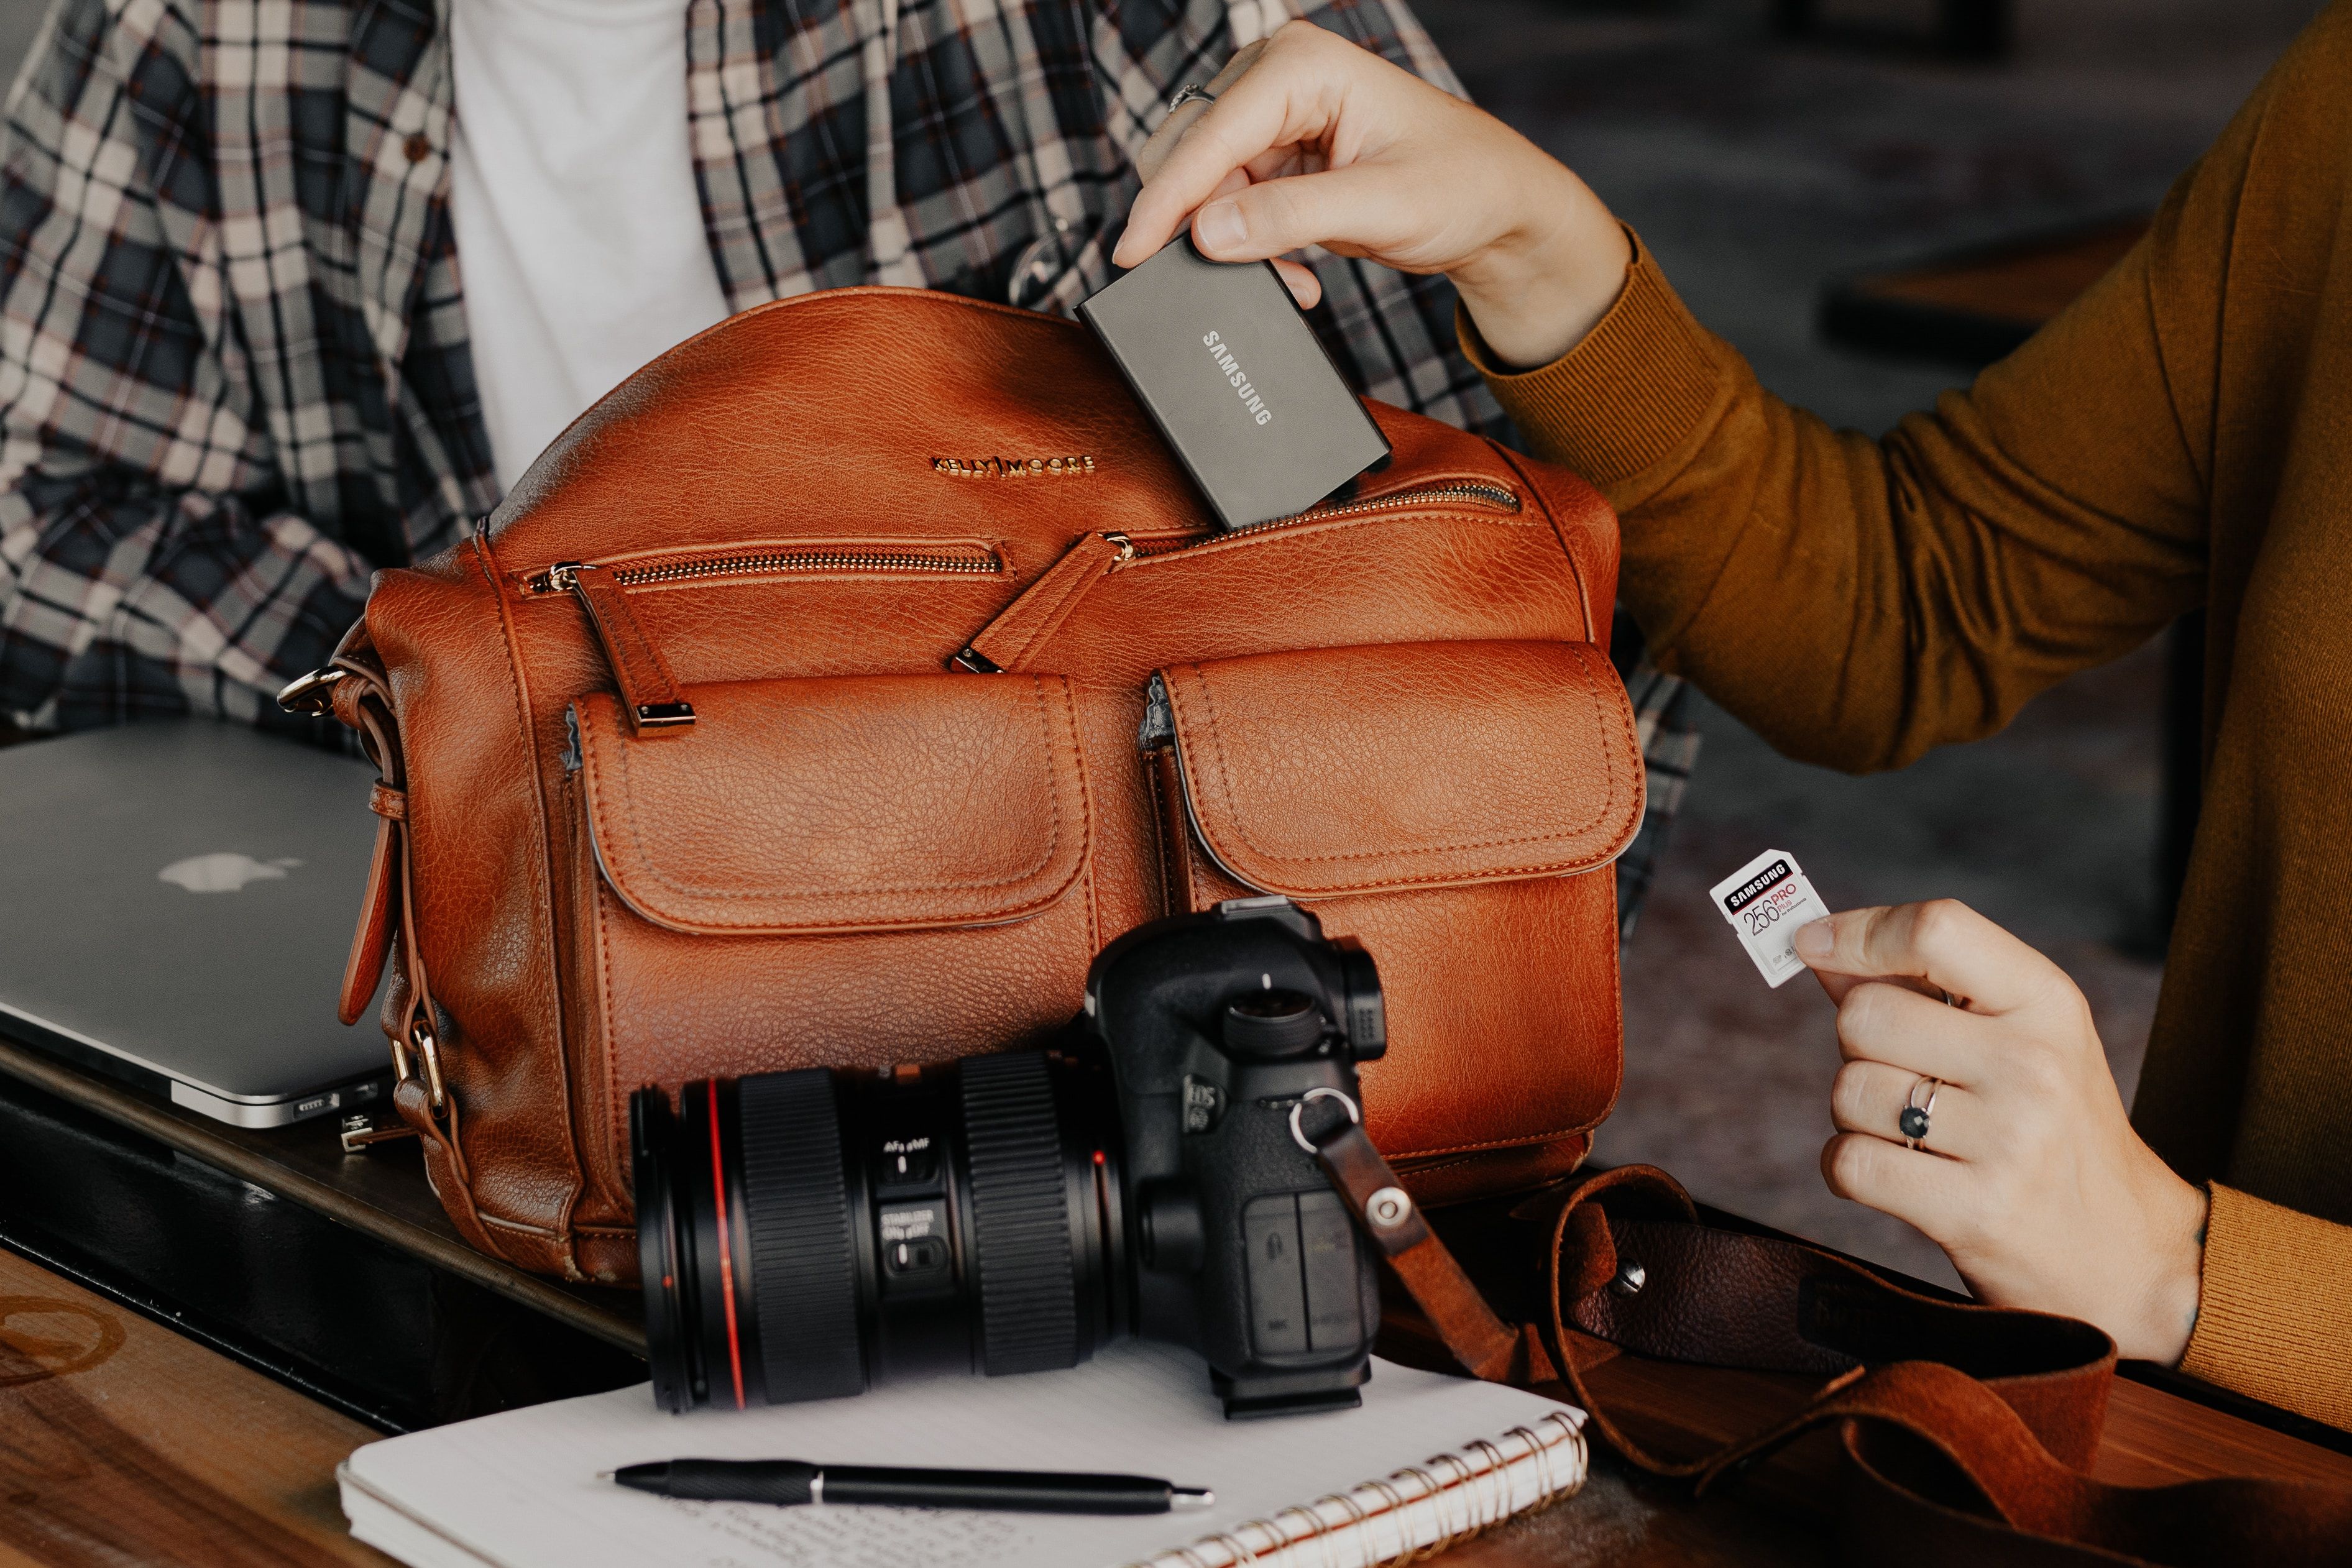 Photo of a person using a bag next to a camera while holding a memory card